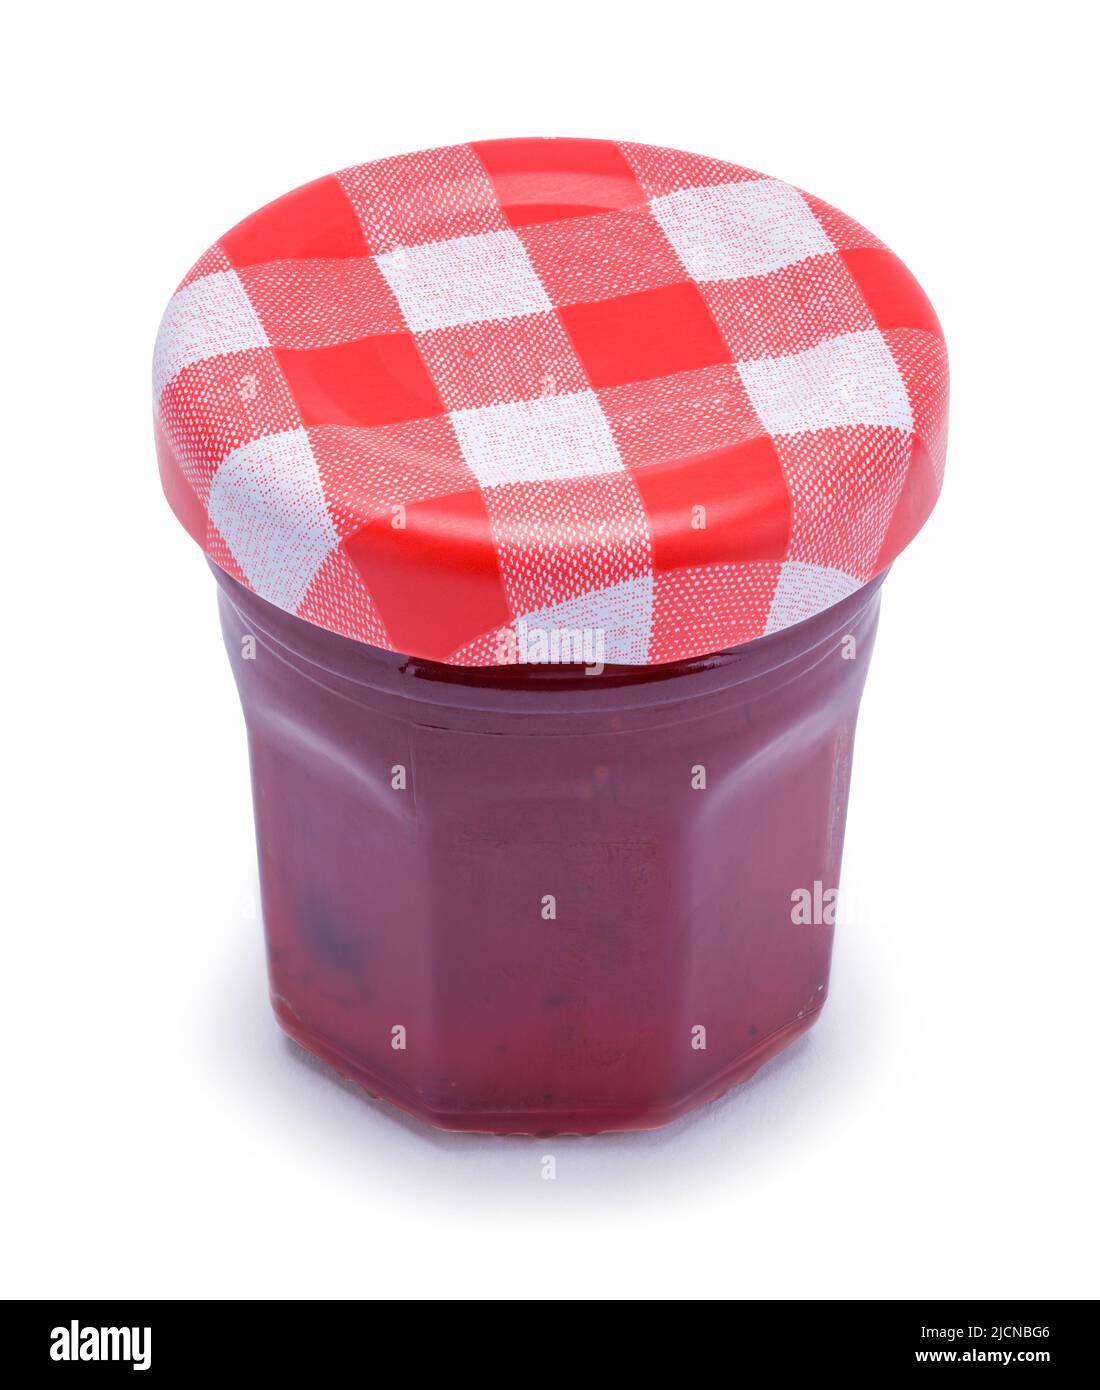 Small Jar of Strawberry Jam Cut Out on White. Stock Photo